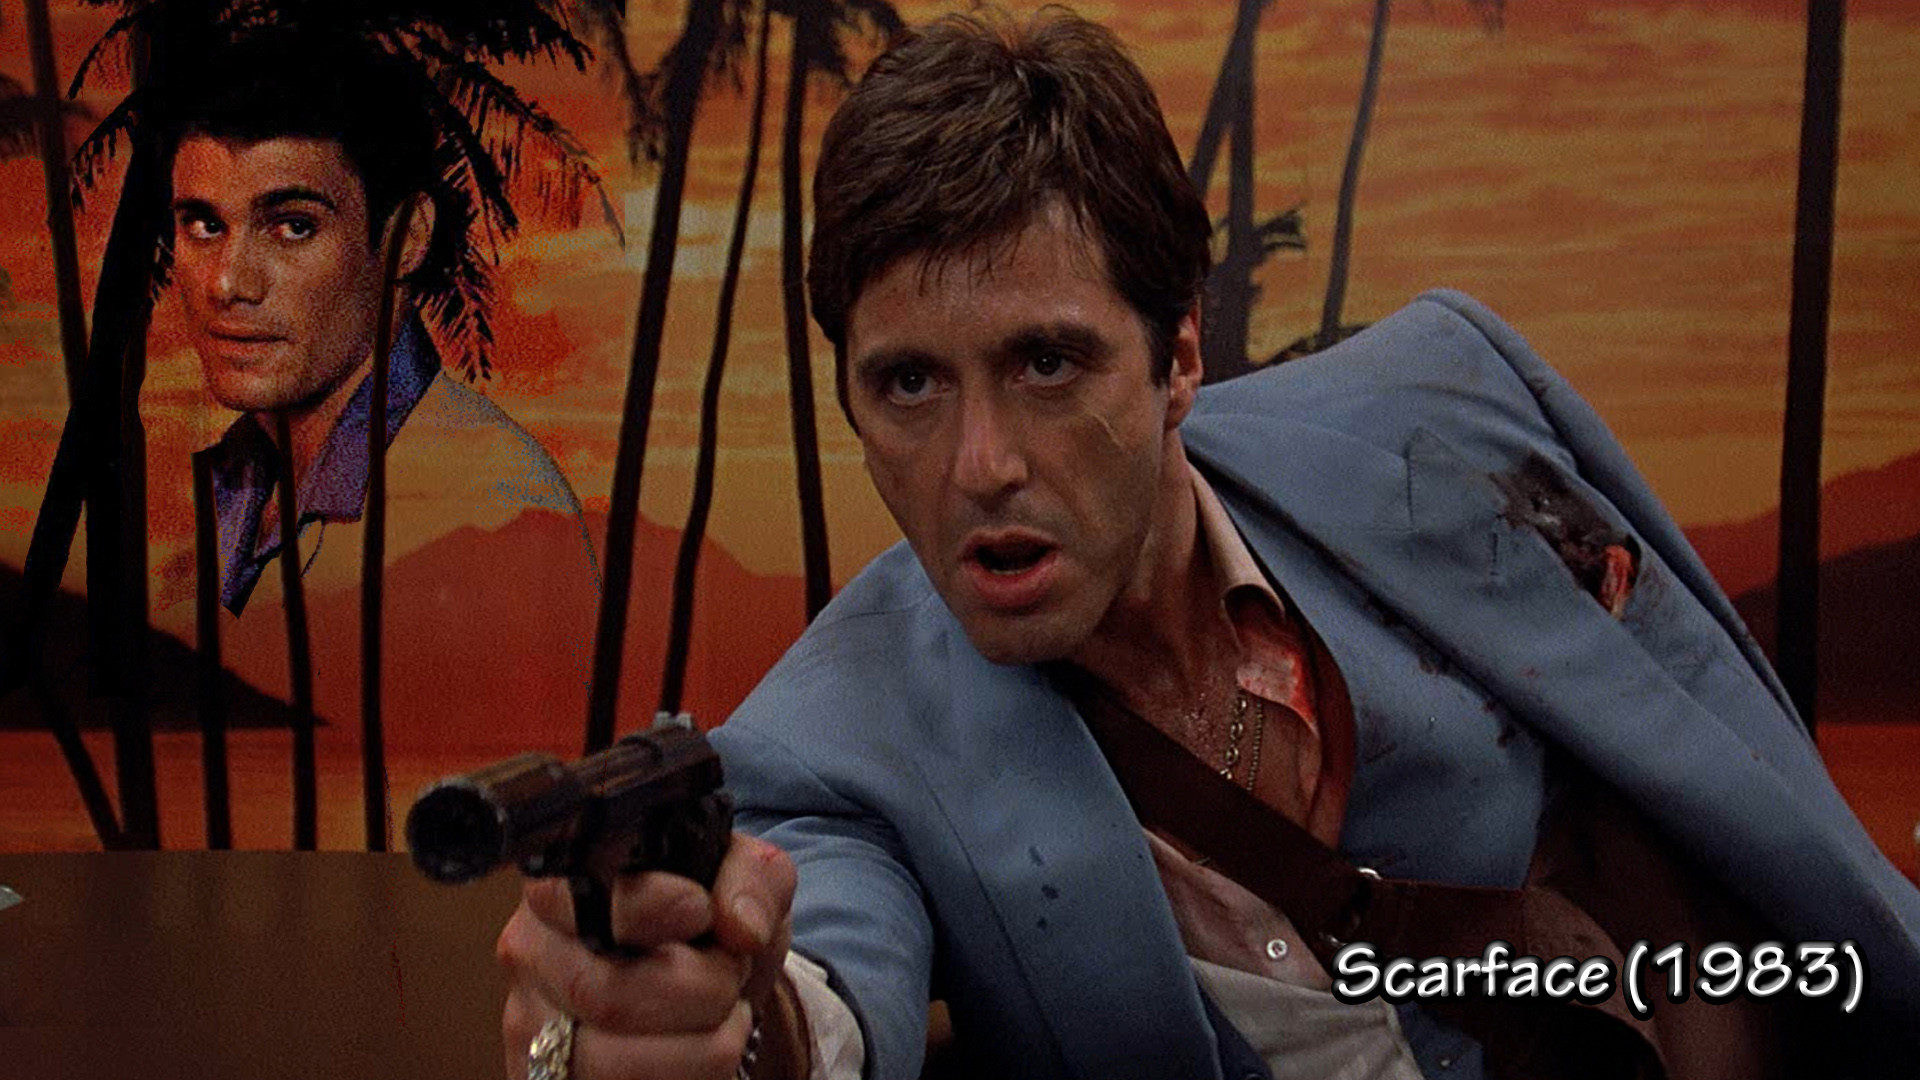 1920x1080 HD Scarface (1983) Wallpaper - New Post has been published on windows  wallpapers